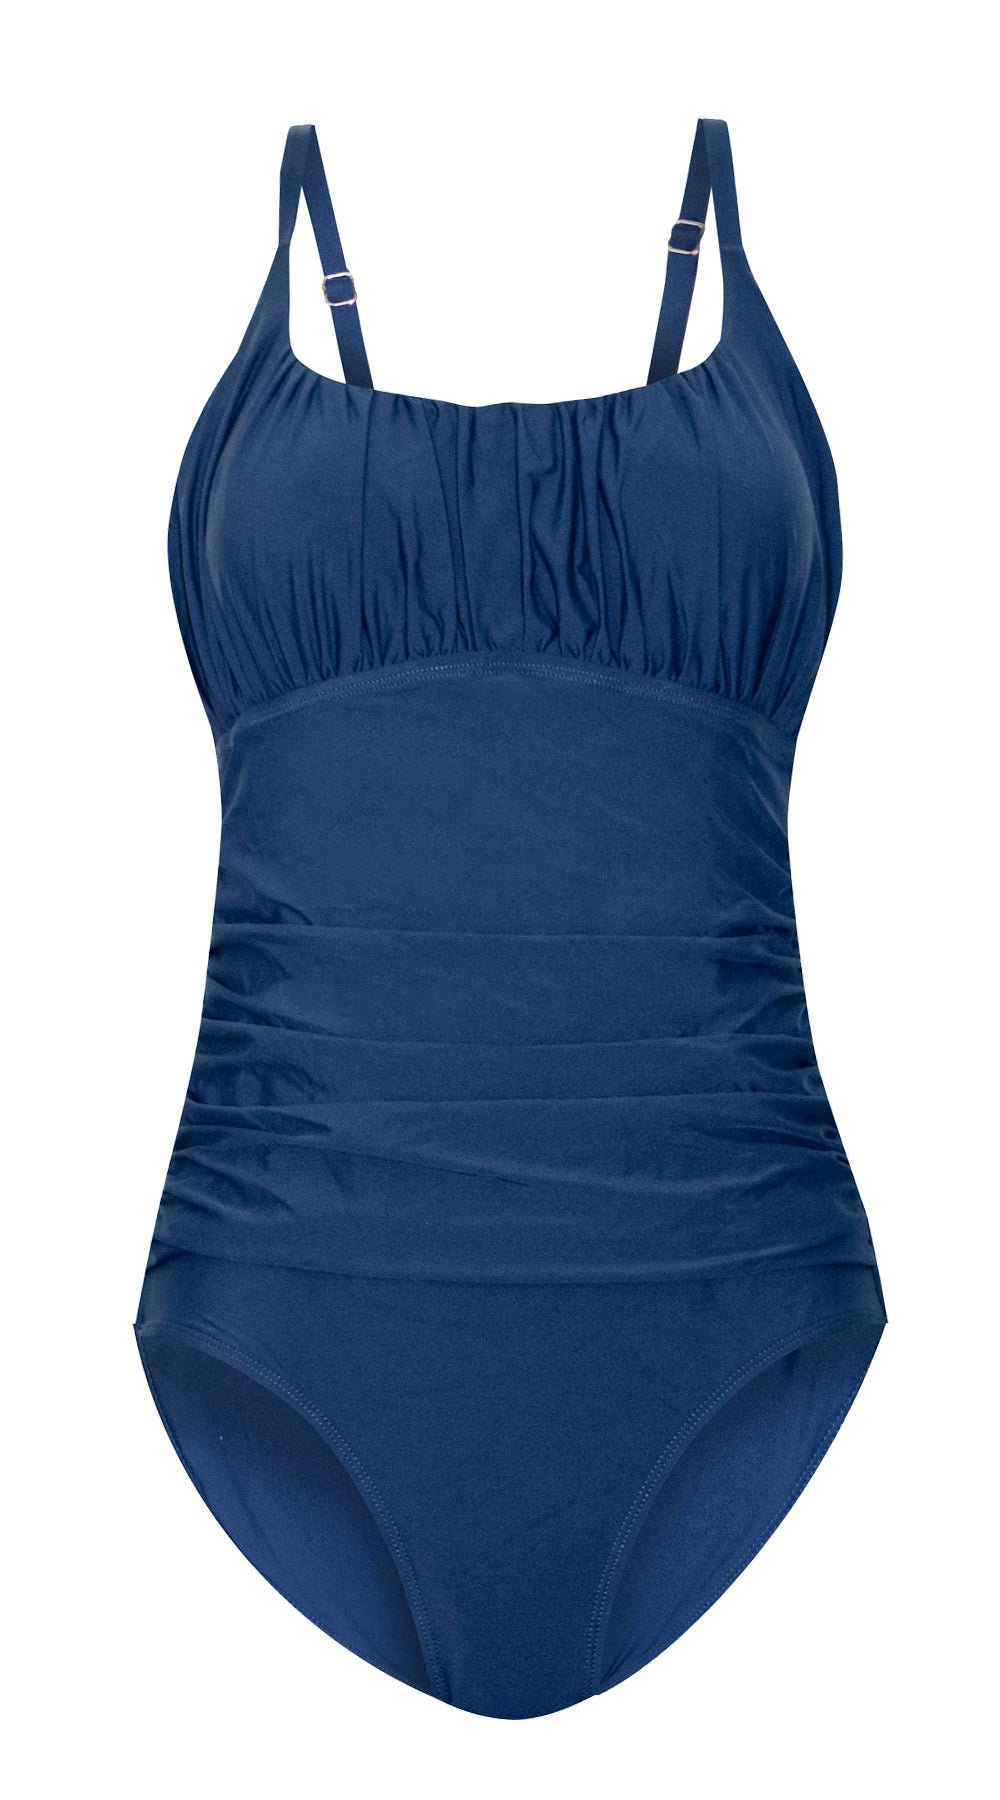 Essentials Ruched Solid Suit (Navy) - Bare Essentials
One Piece Tummy Control Swimsuits